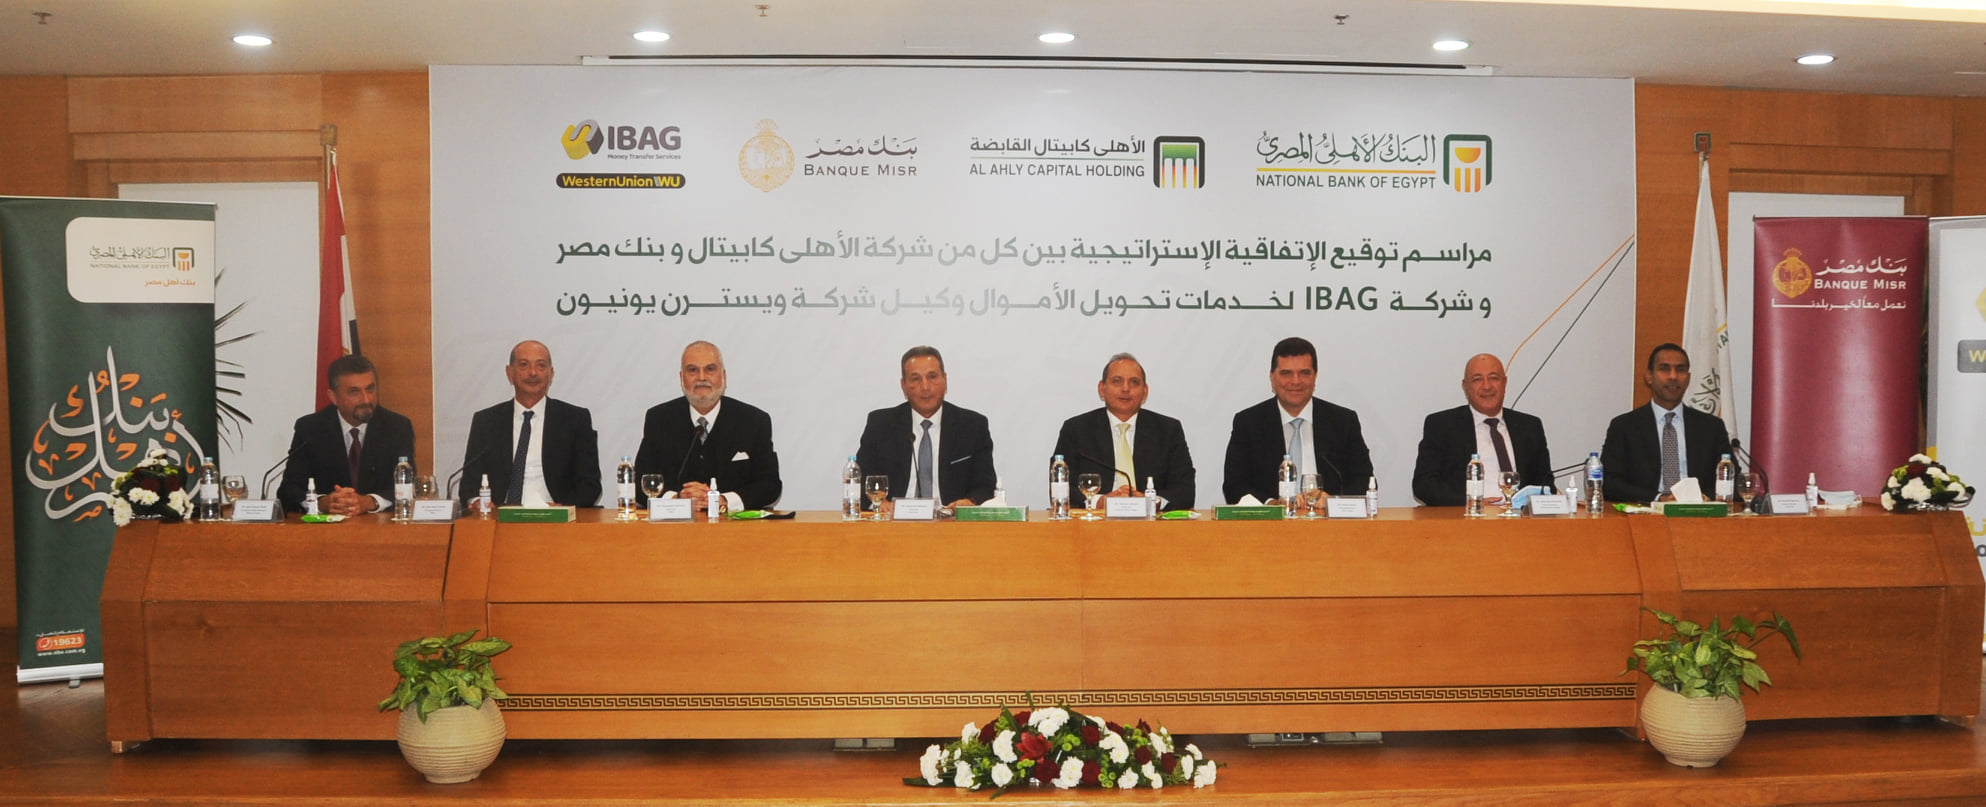 Banque-Misr-NBE-IBAG-Western-Union